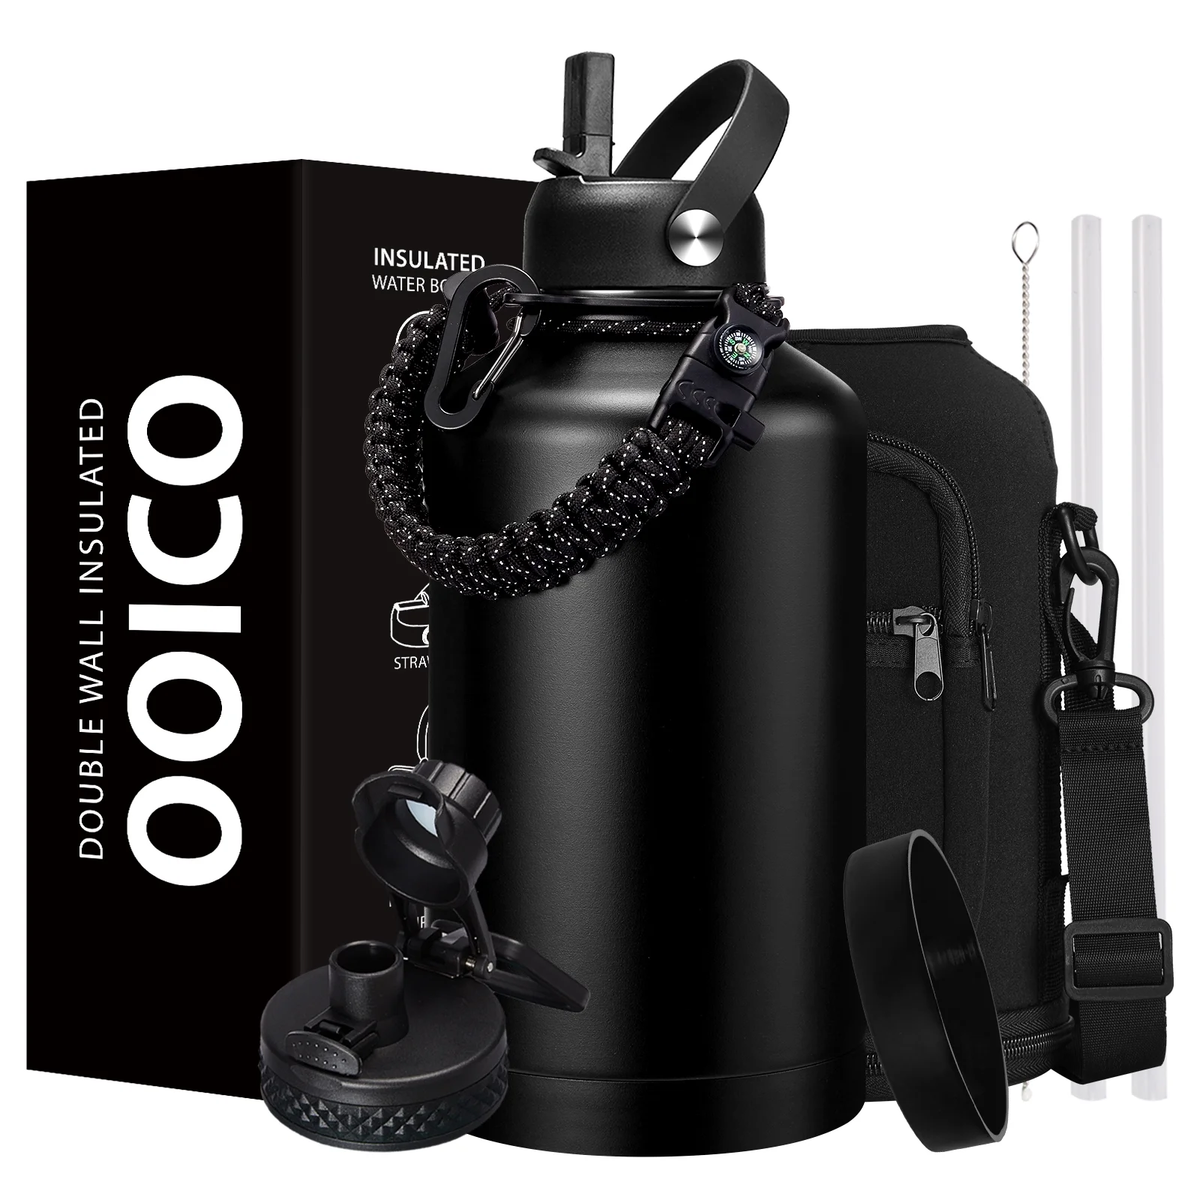 OOICO™ Insulated Water Bottle